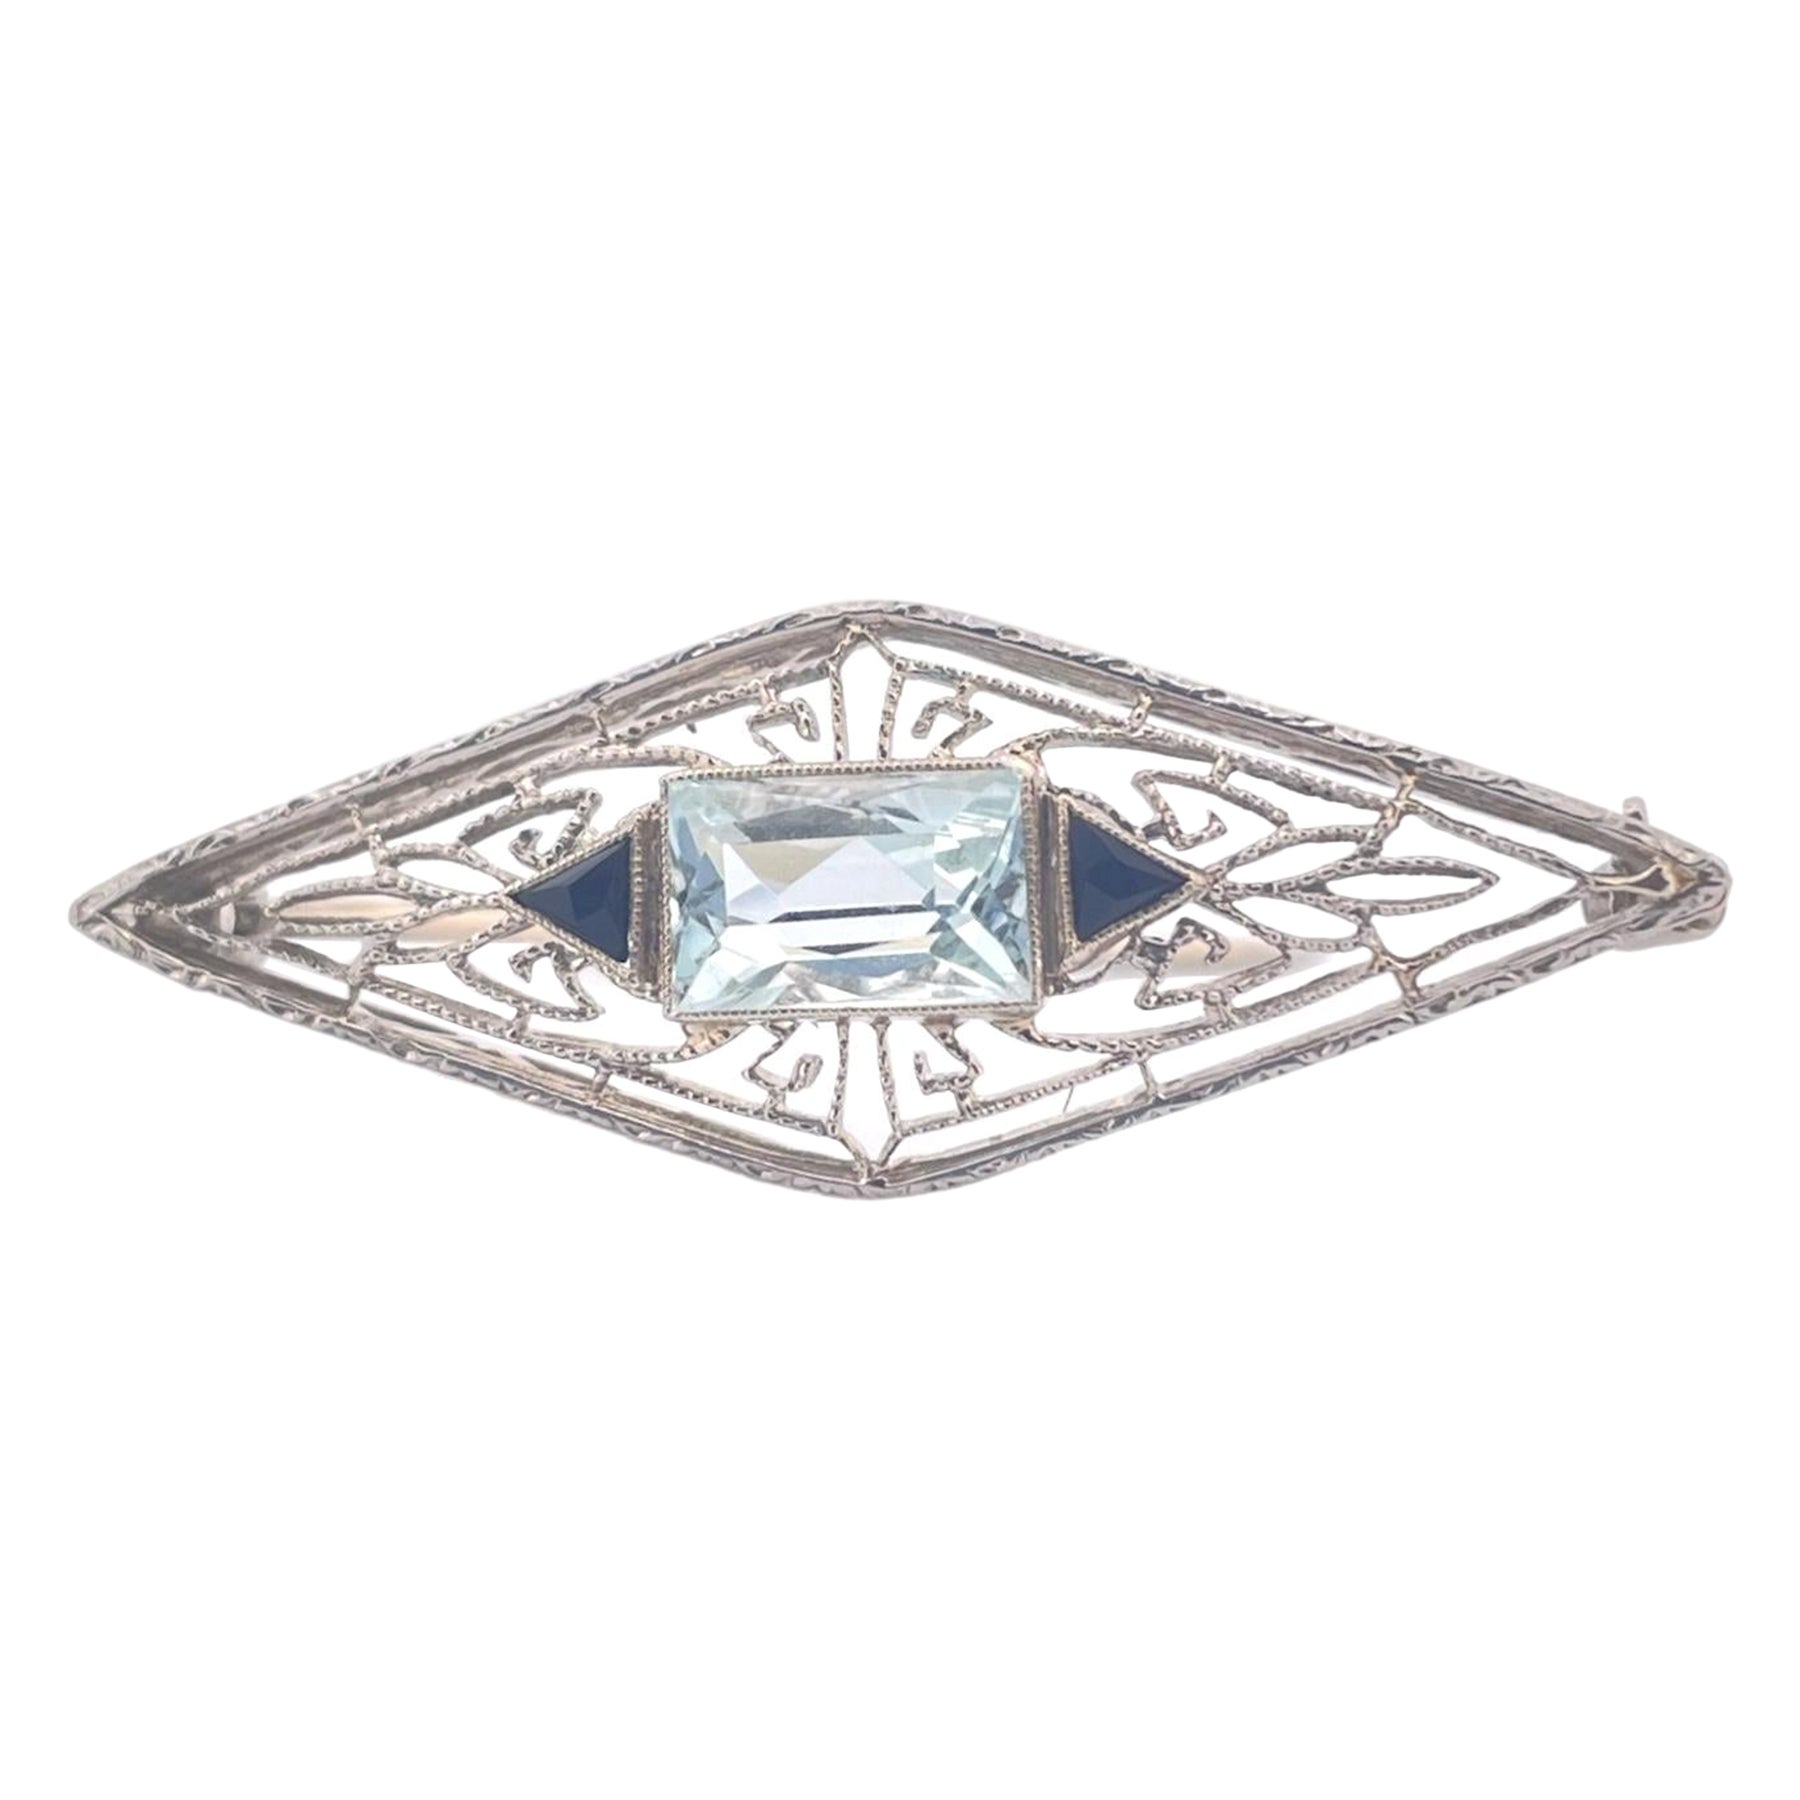 Art Deco Aqua and Onyx Brooch - 14K White Gold For Sale